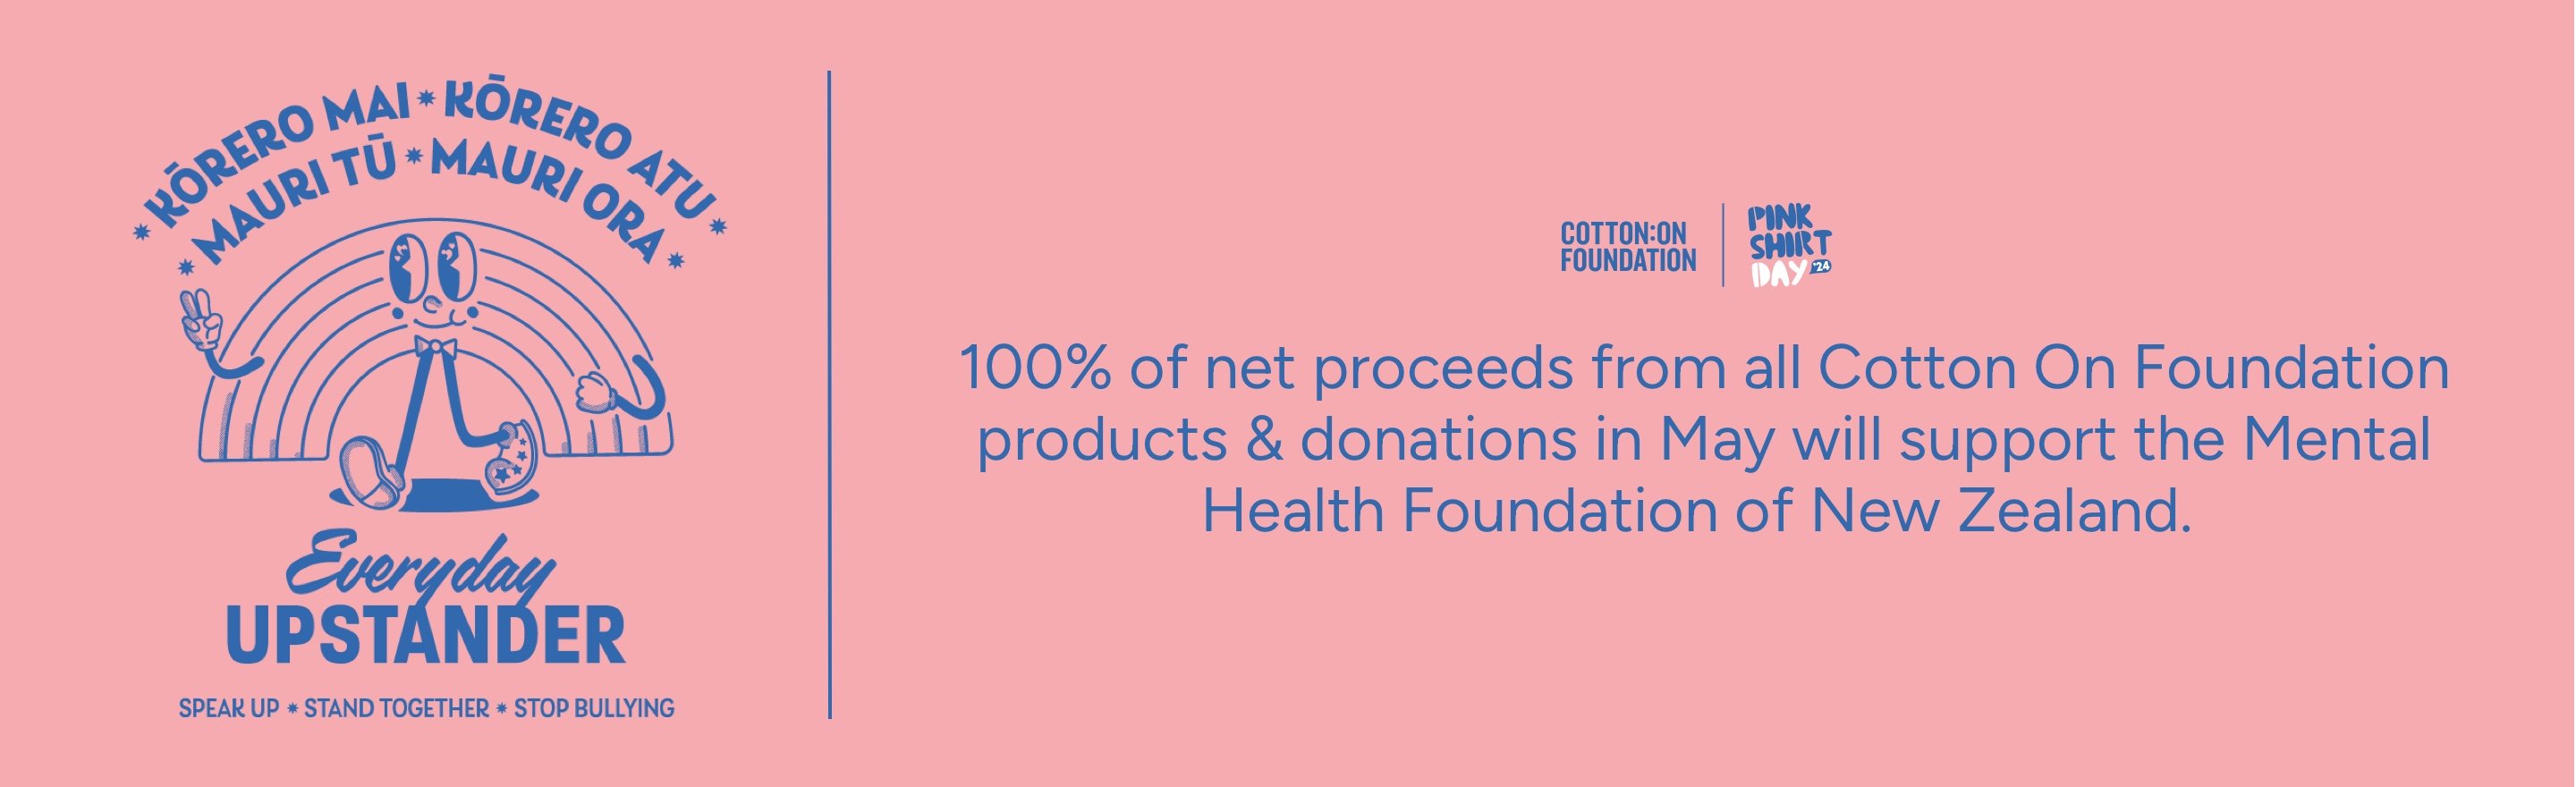 100% of net proceeds from all Cotton On Foundation products and donations in May will support the mental health foundation of New Zeland